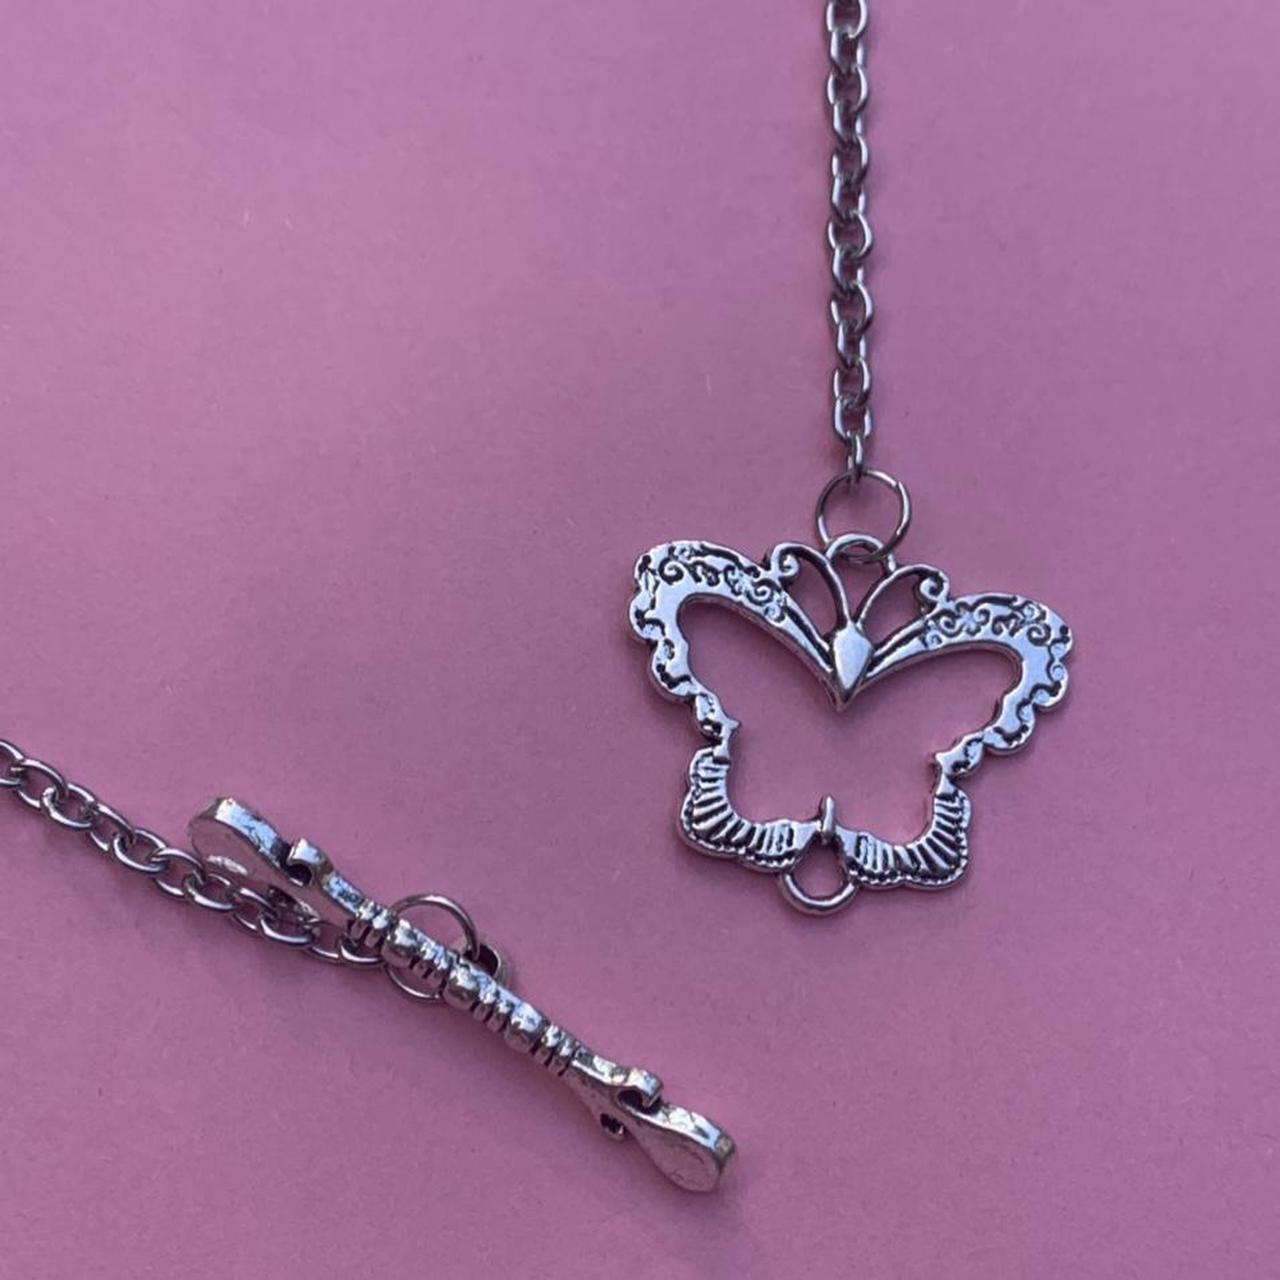 The butterfly clasp Chain necklace